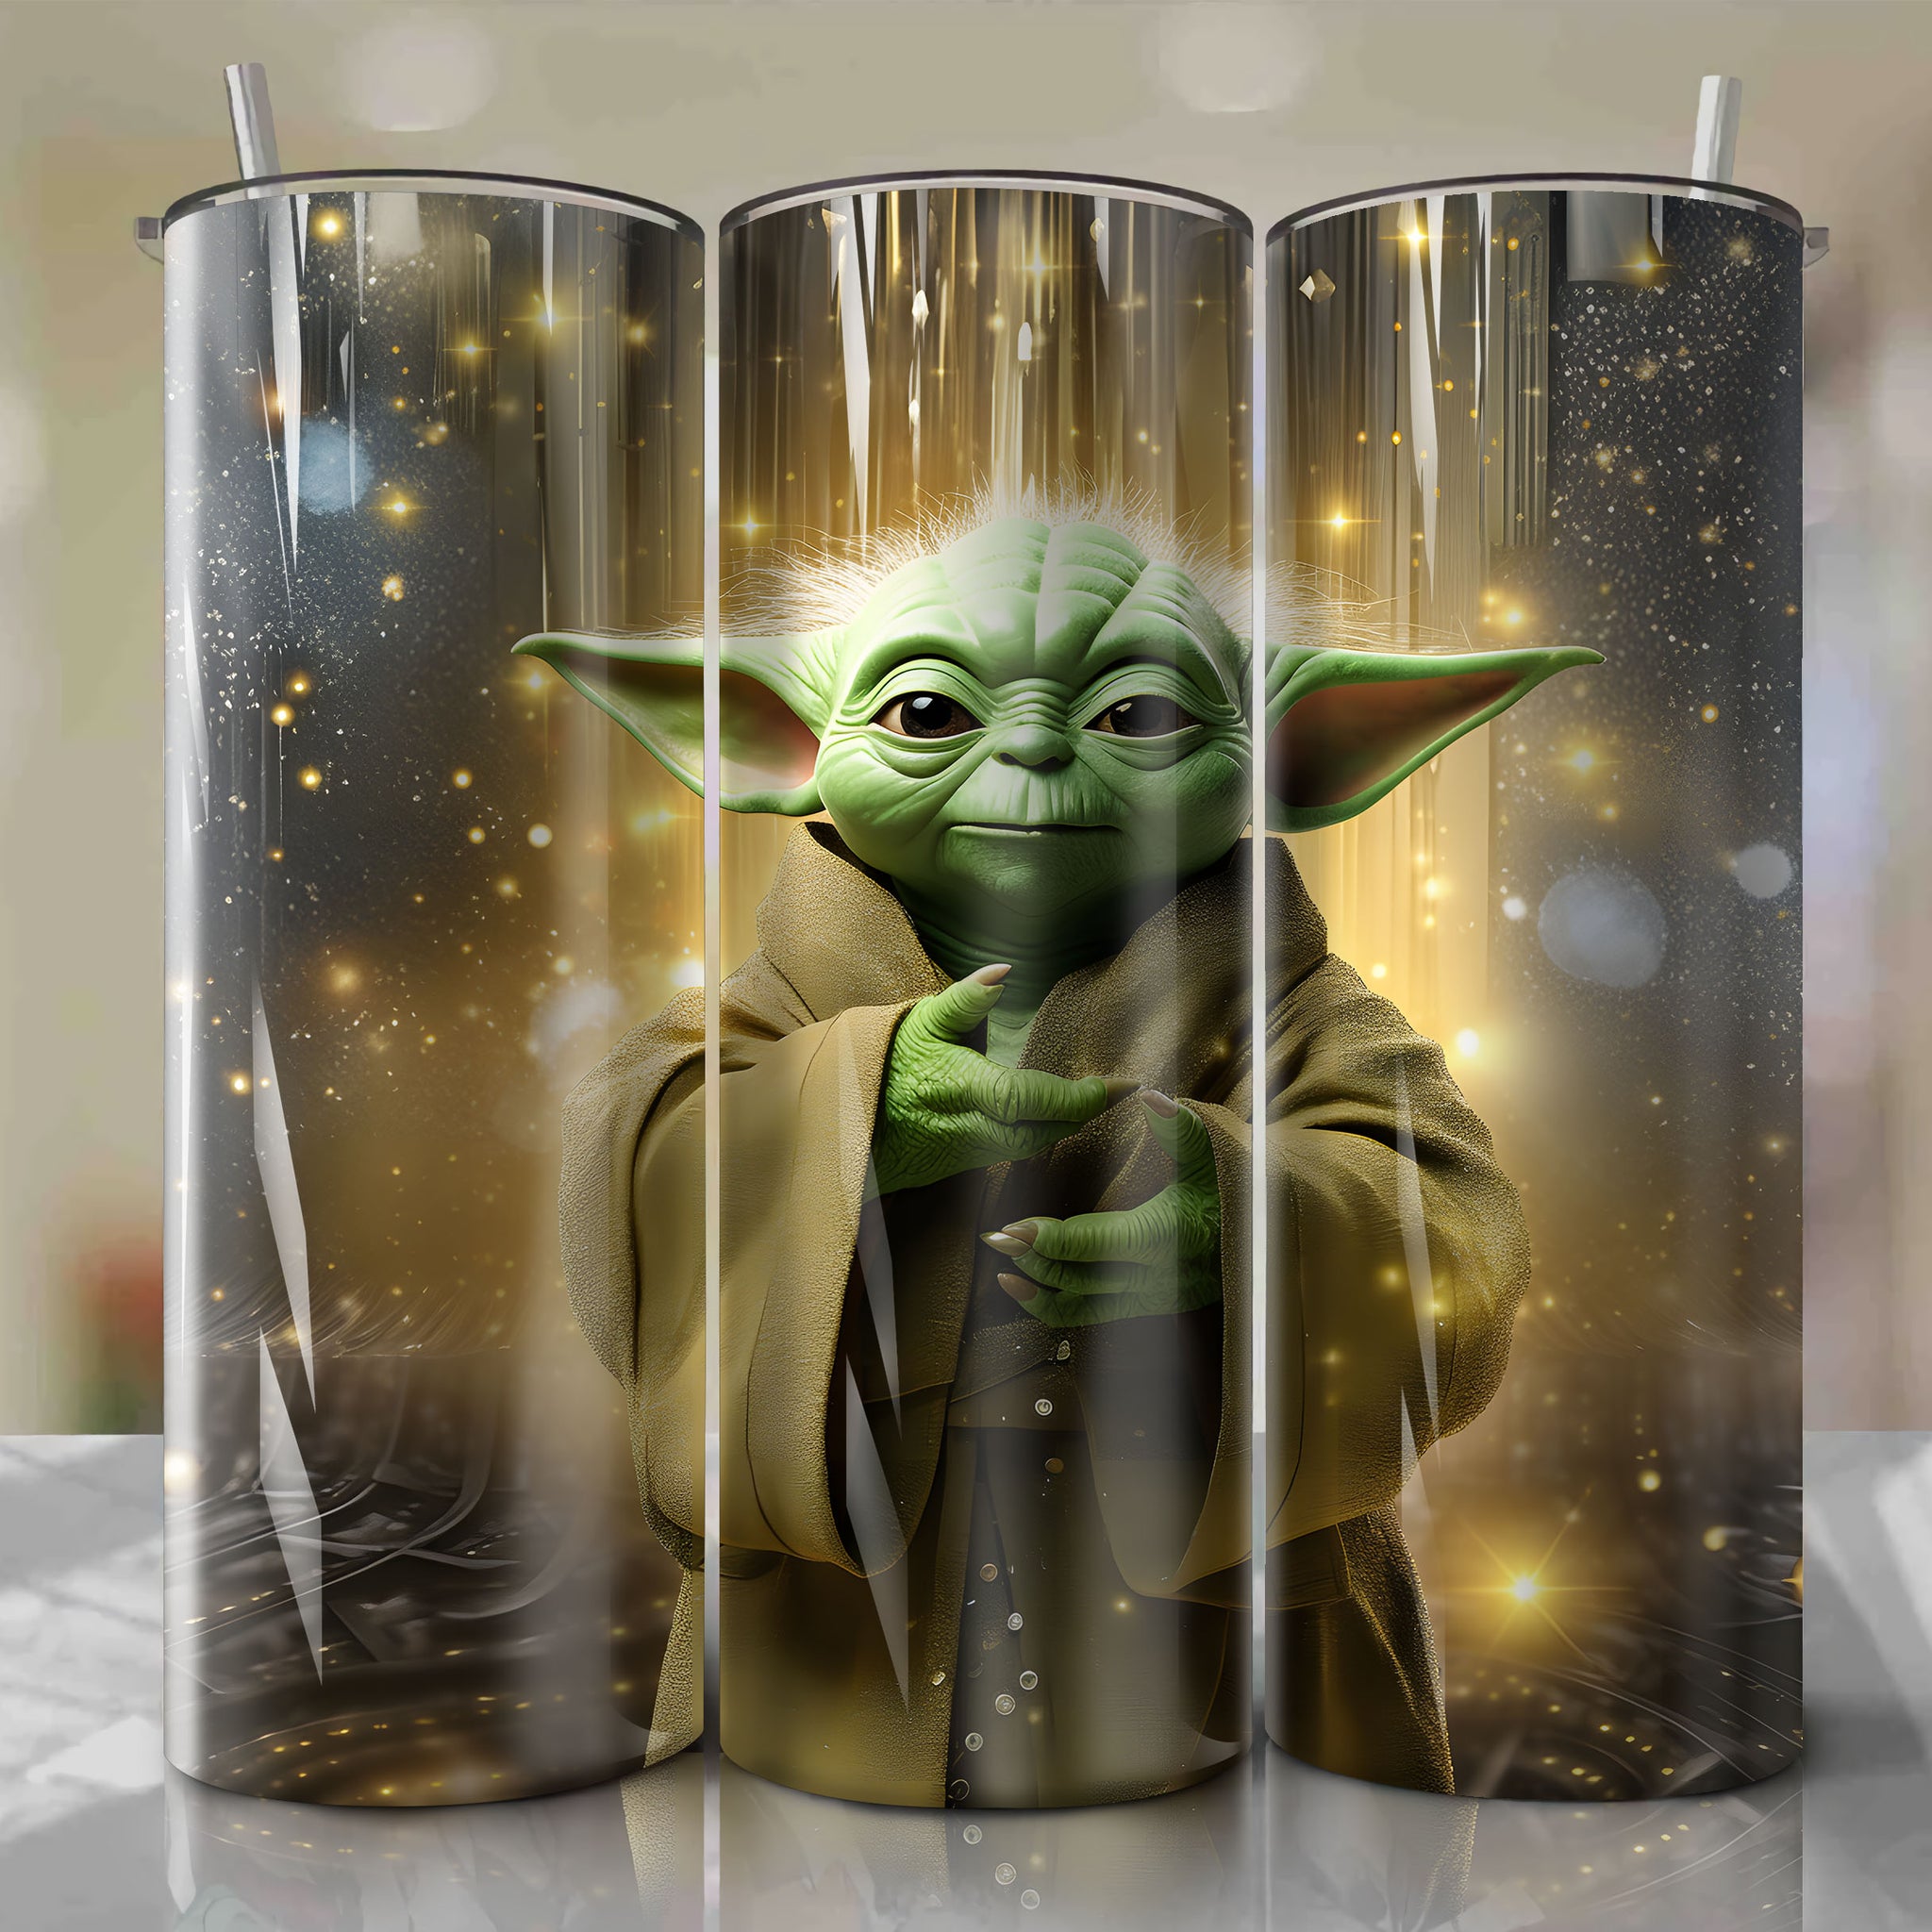 New York Giants Tumbler Unbelievable Baby Yoda NY Giants Gift Ideas -  Personalized Gifts: Family, Sports, Occasions, Trending